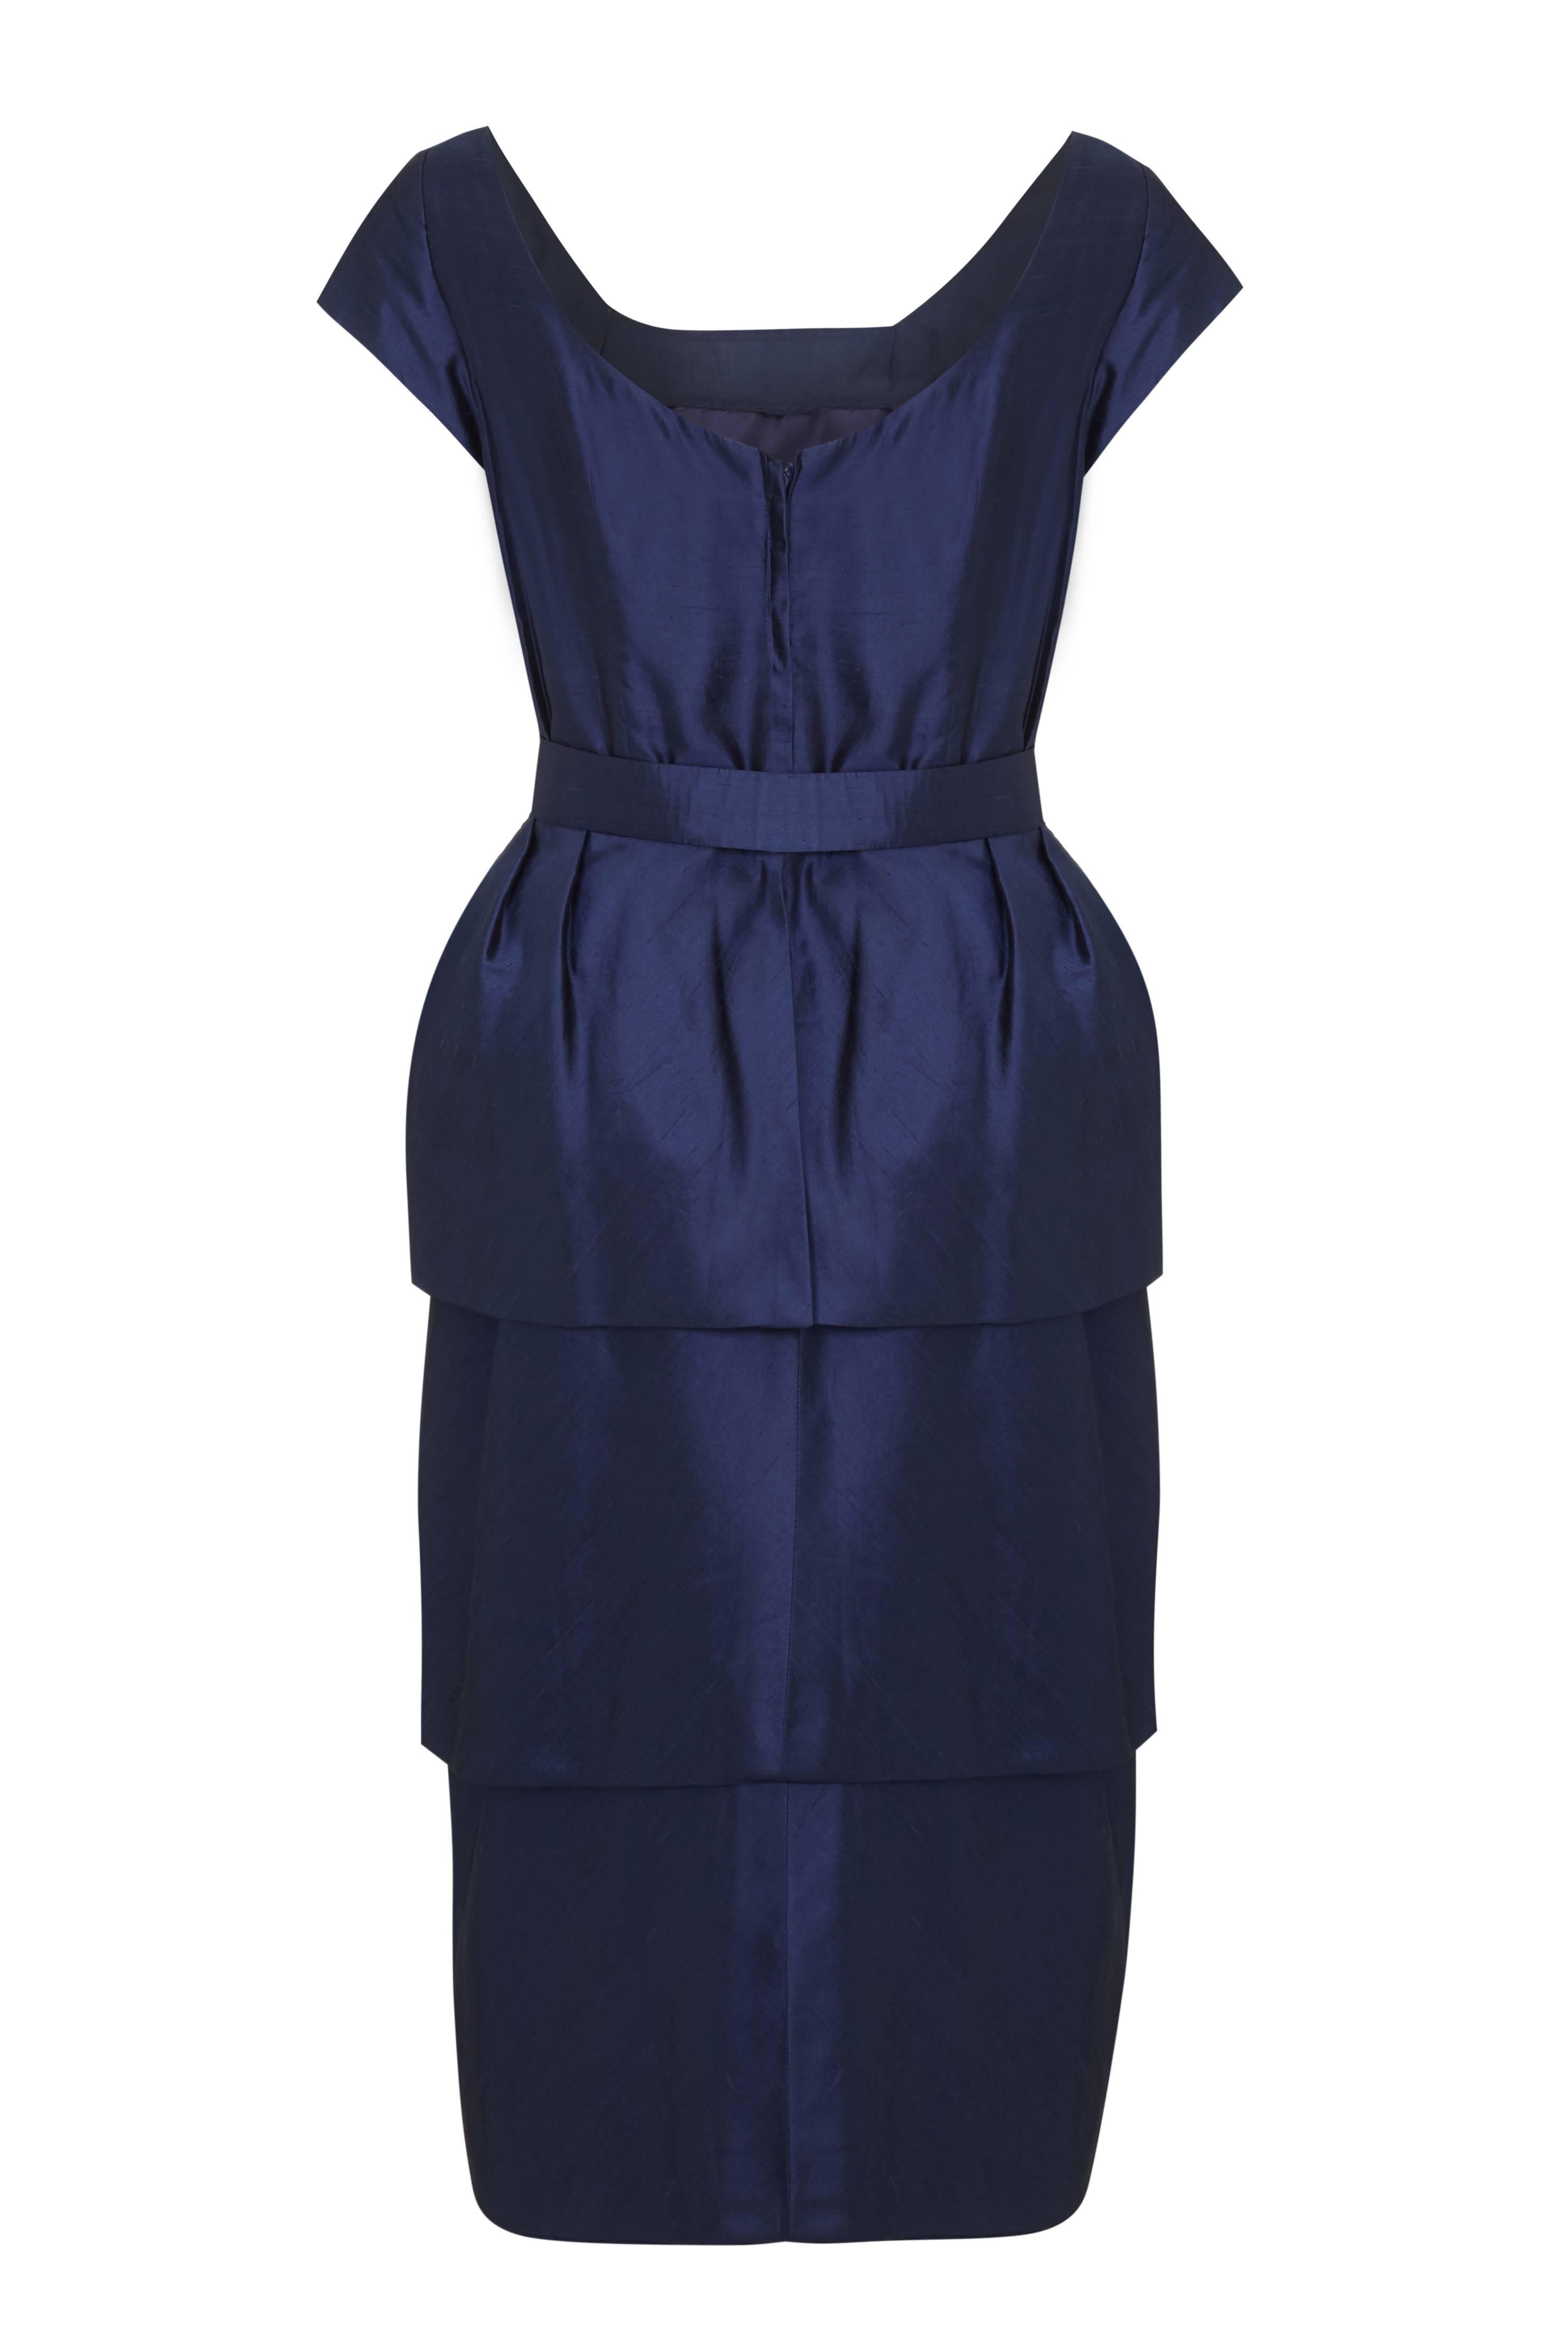 Fantastic vintage 1950s navy silk dress with matching original bow belt.  The dress features a fun tiered petal skirt, cap sleeves and a low back.  Inside it is fully lined and in excellent condition with no flaws to mention. Would work best on